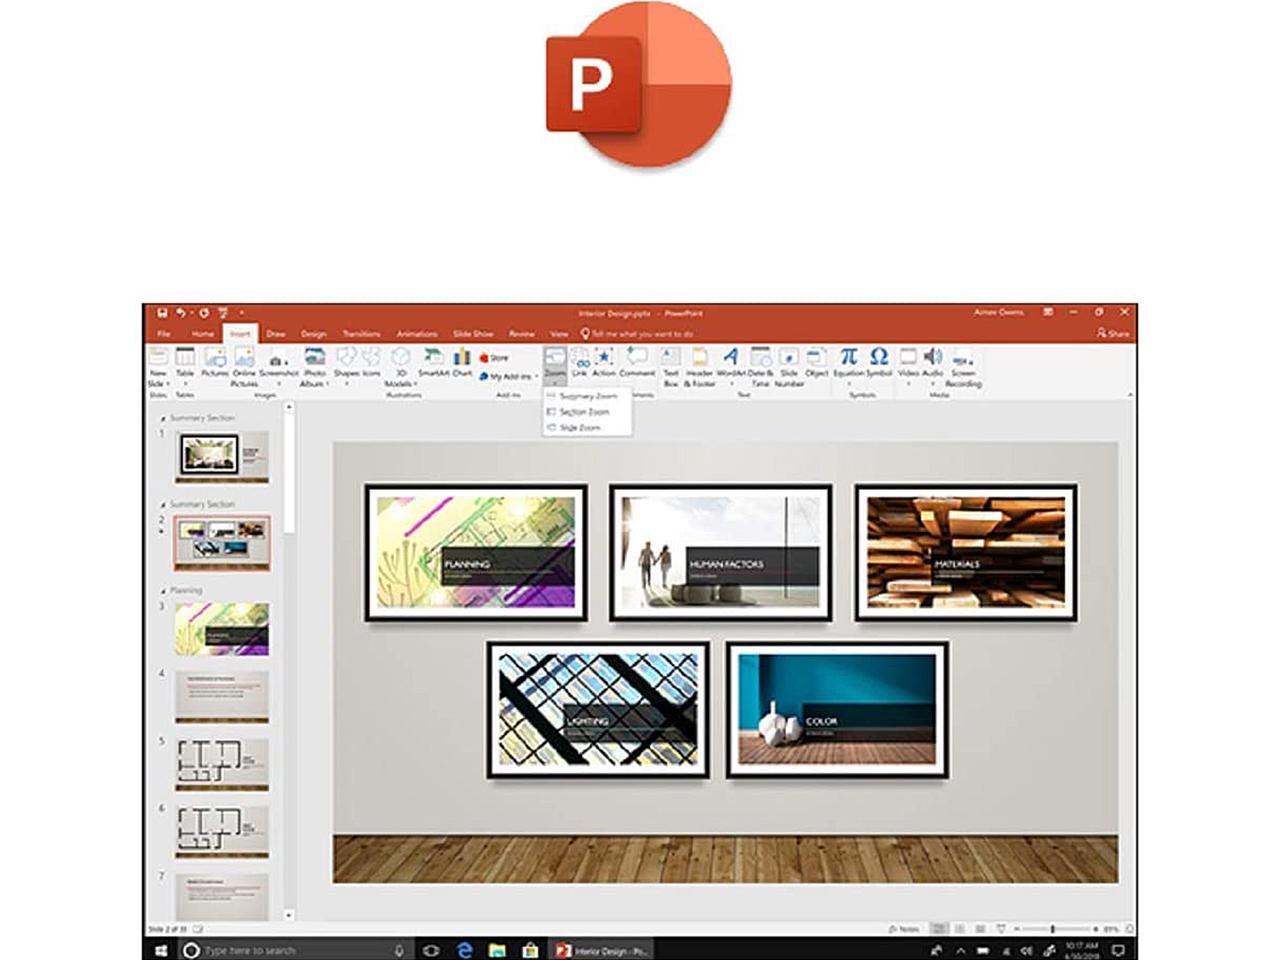 microsoft office home and business 2019 free download